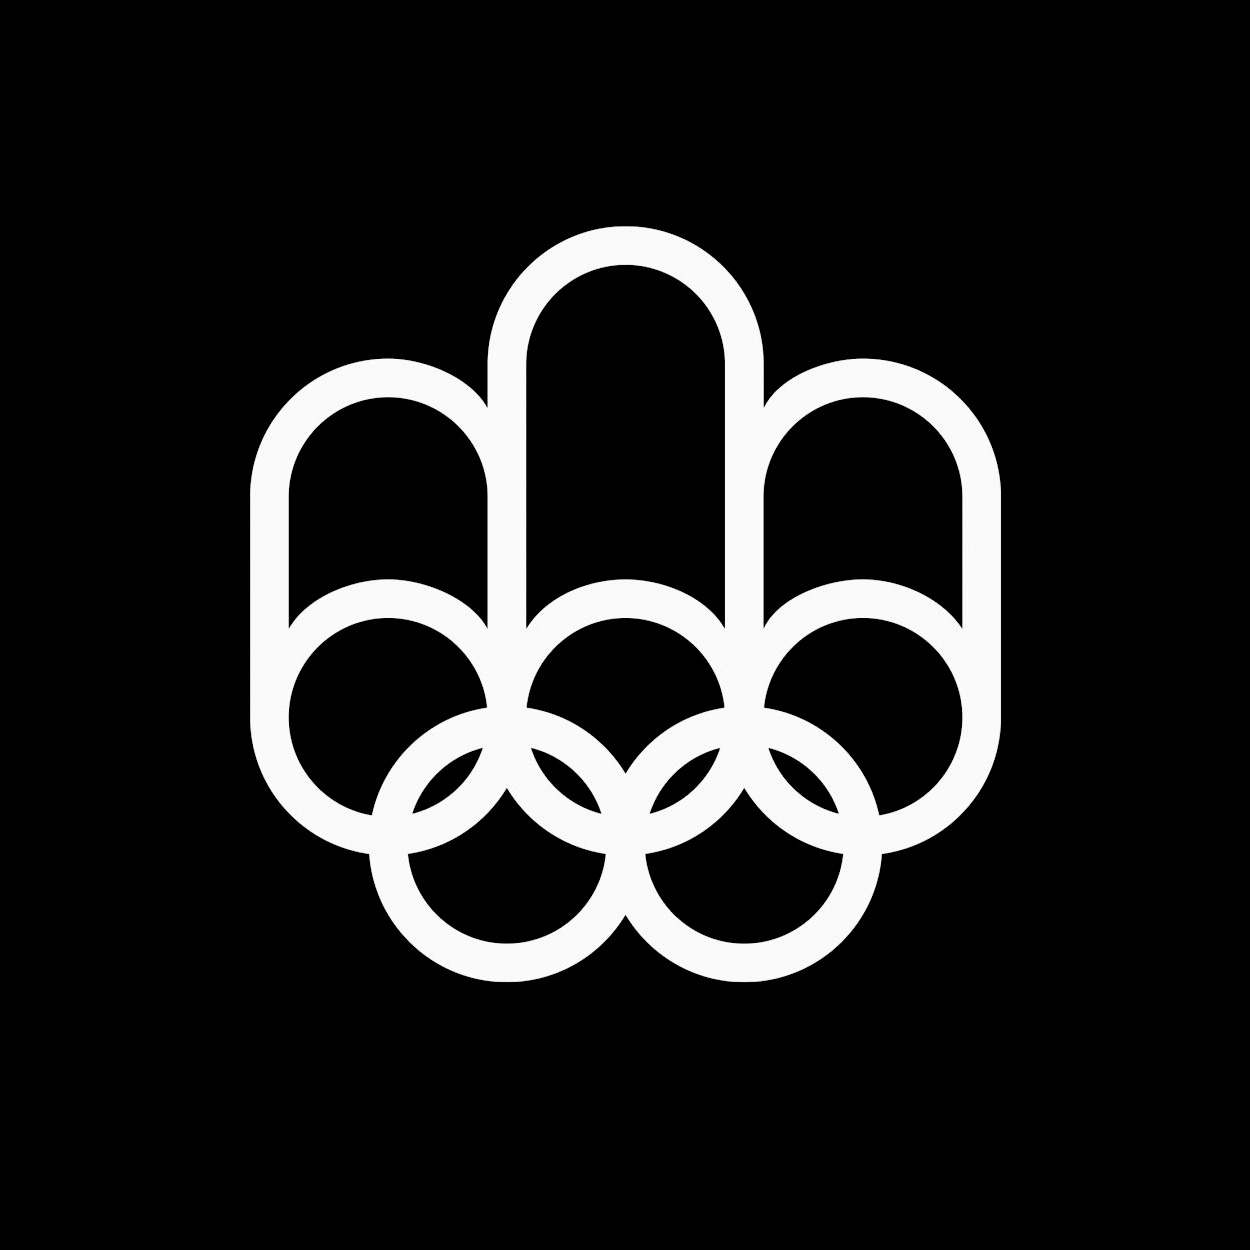 Montreal Olympics 1976 logo by Georges Huel